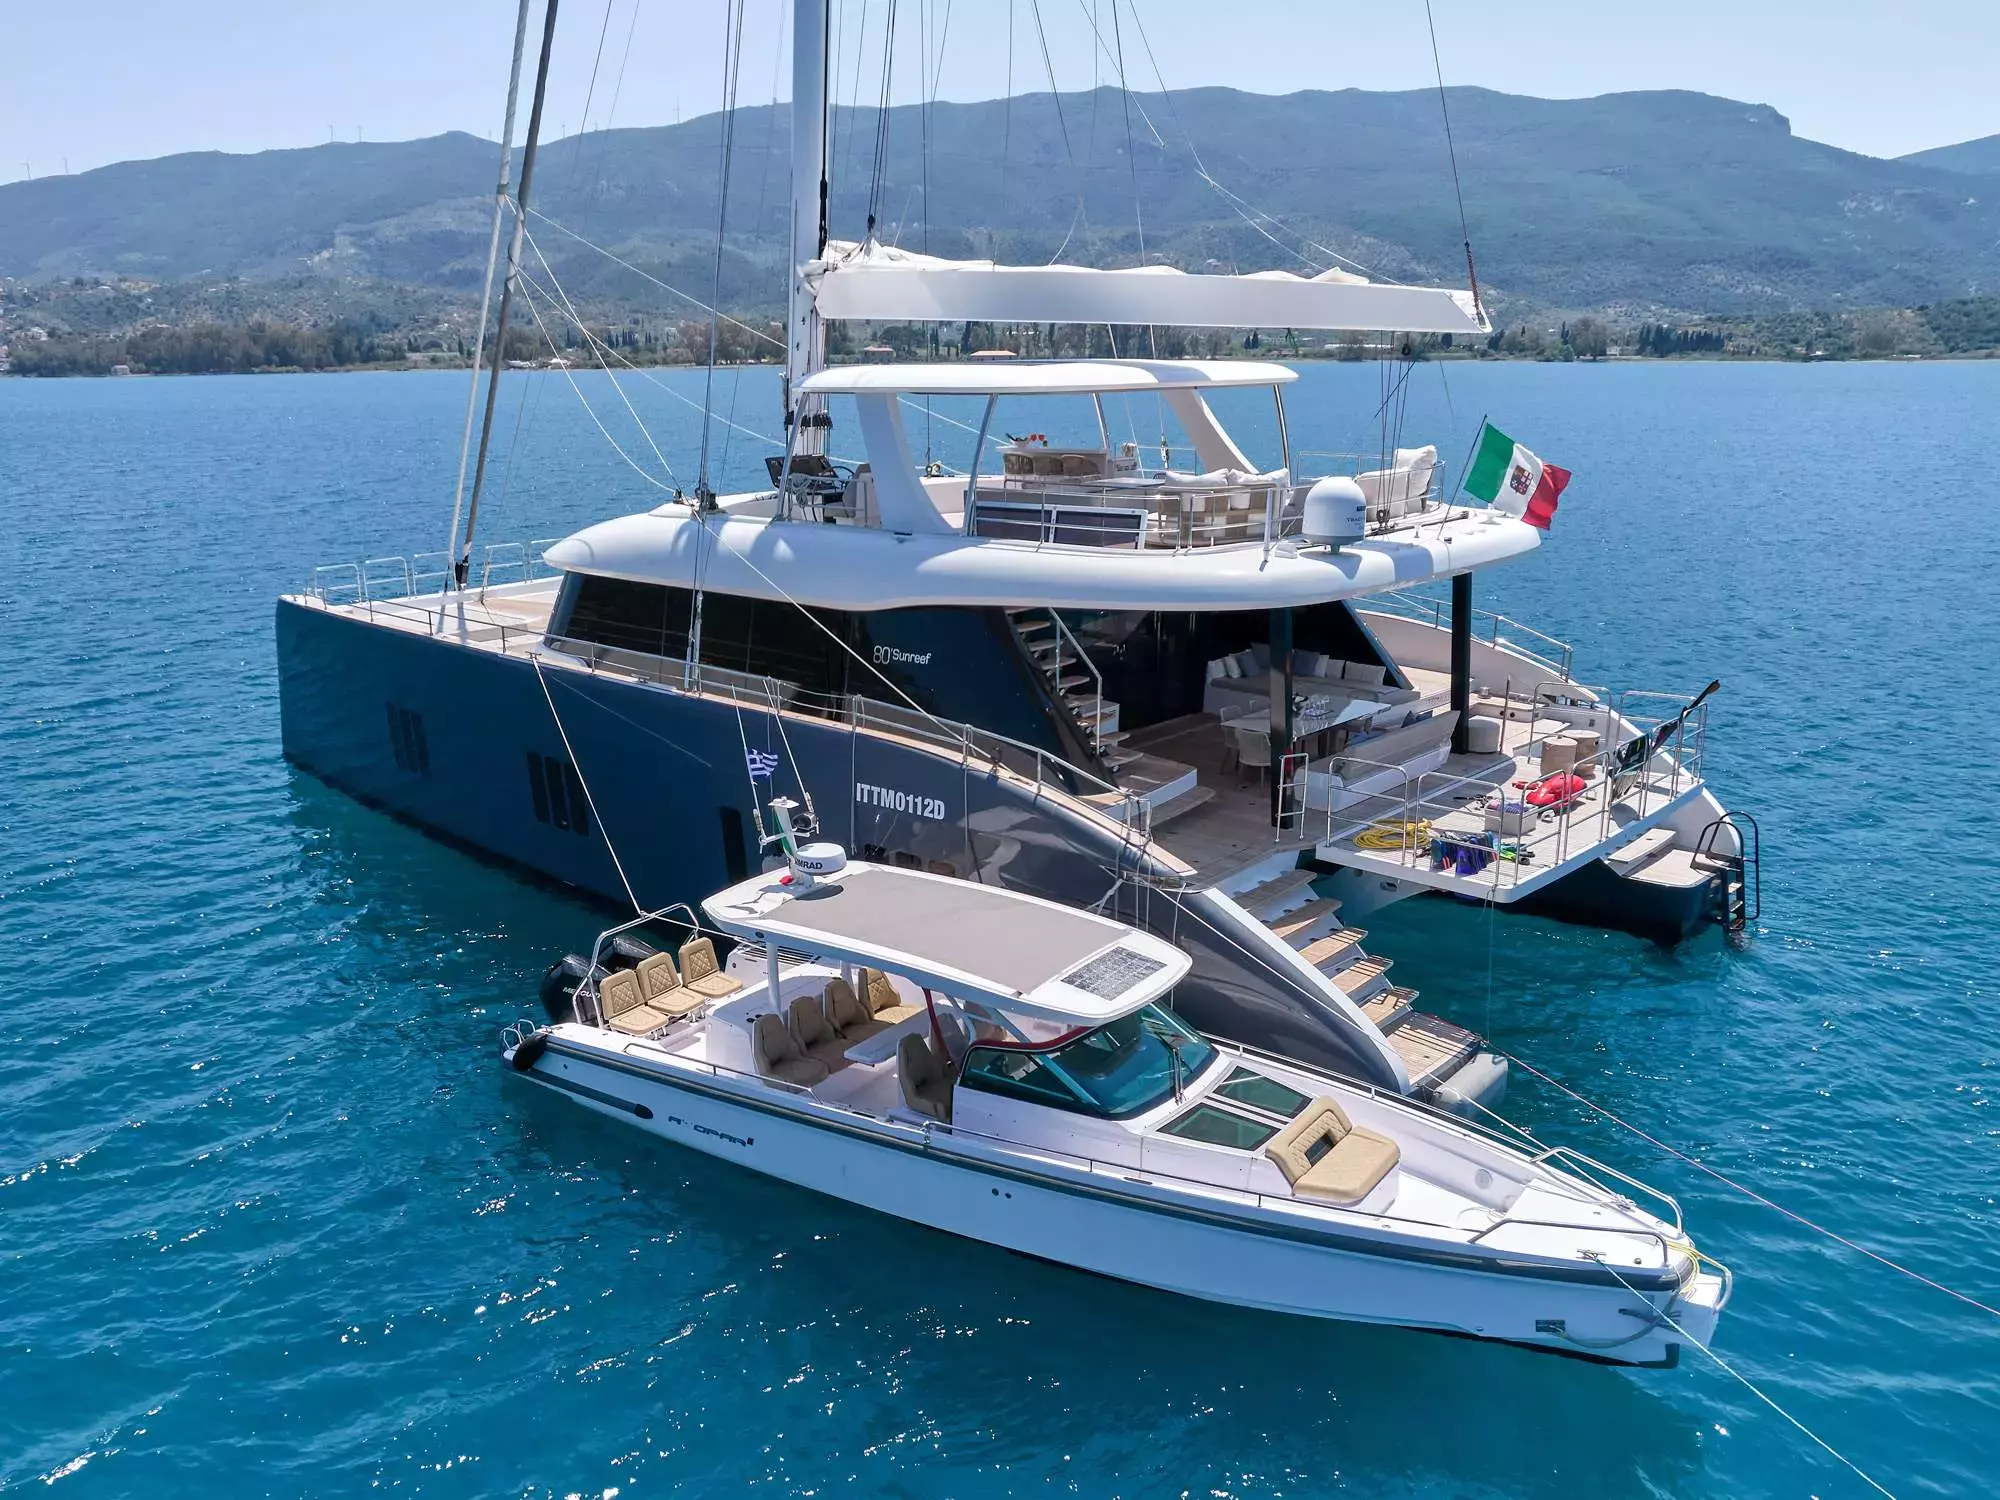 Genny by Sunreef Yachts - Top rates for a Rental of a private Luxury Catamaran in Greece